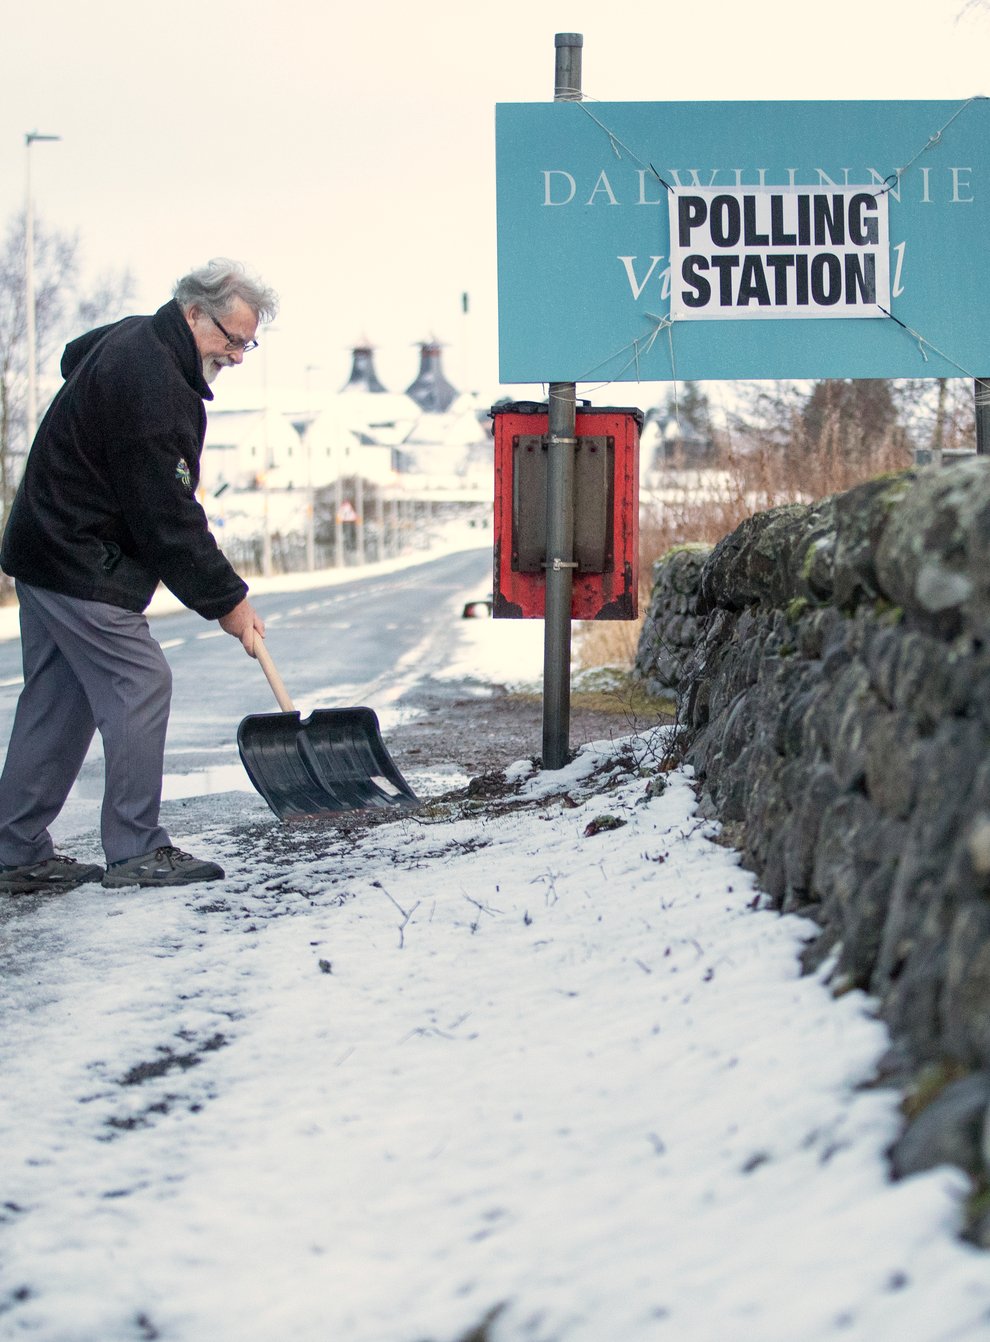 A man clears snow outside a polling station in Dalwhinnie in the Cairngorms, during the 2019 general election (Jane Barlow/PA)